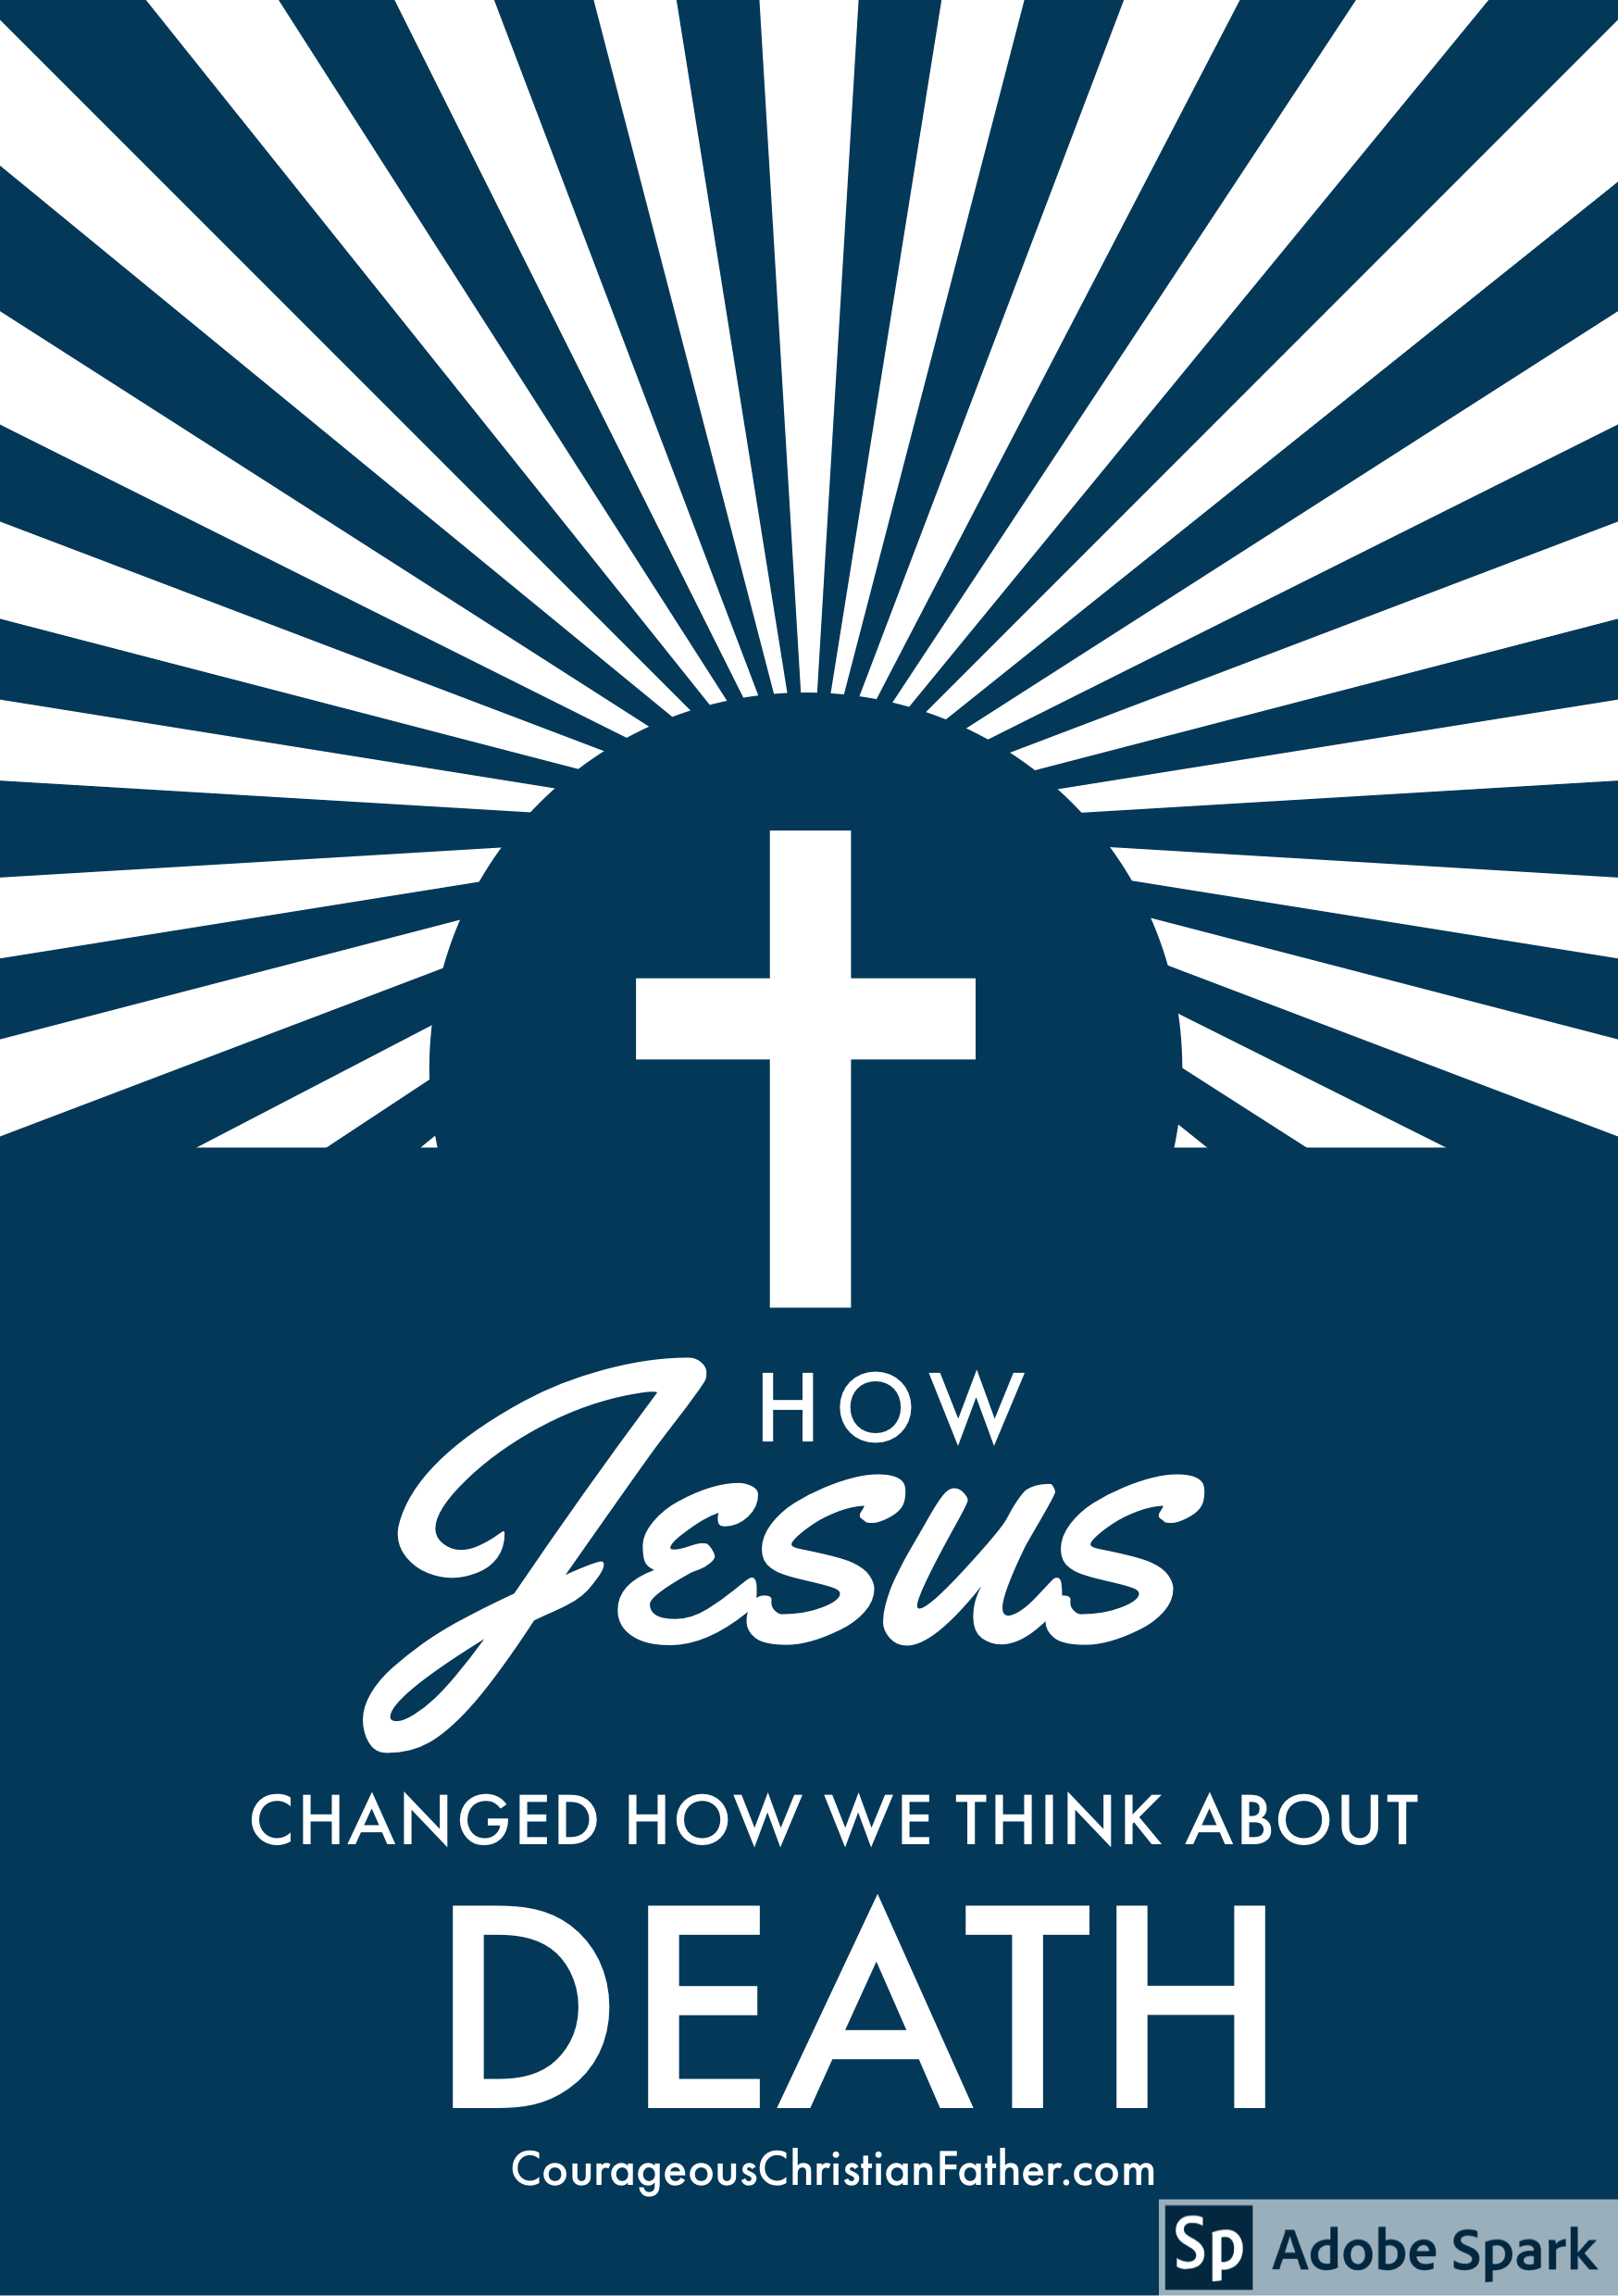 How Jesus Changed How We Think About Death - Jesus changed everything about Death on the Cross!